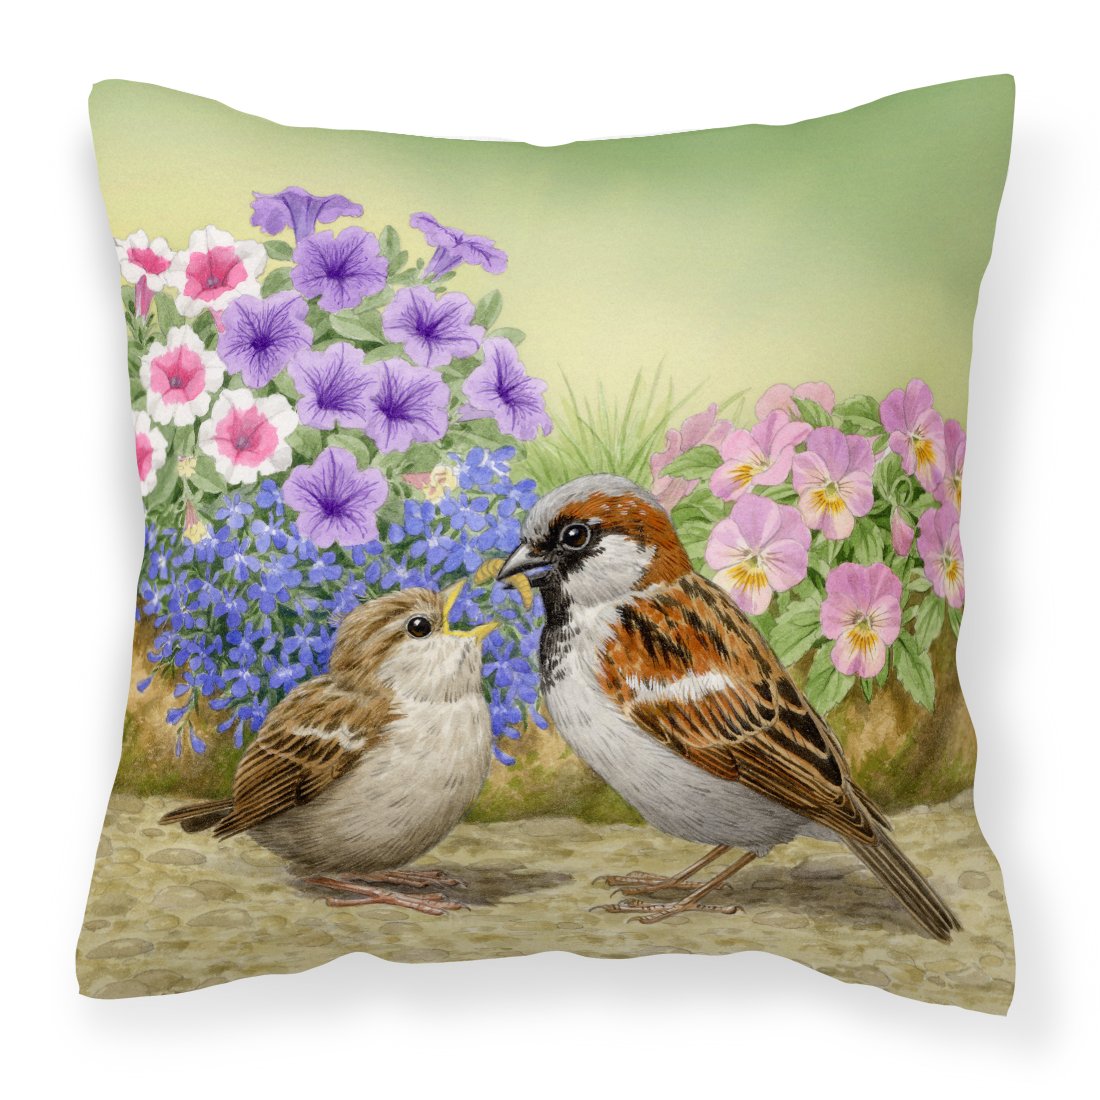 House Sparrows Feeding Time Canvas Decorative Pillow by Caroline's Treasures